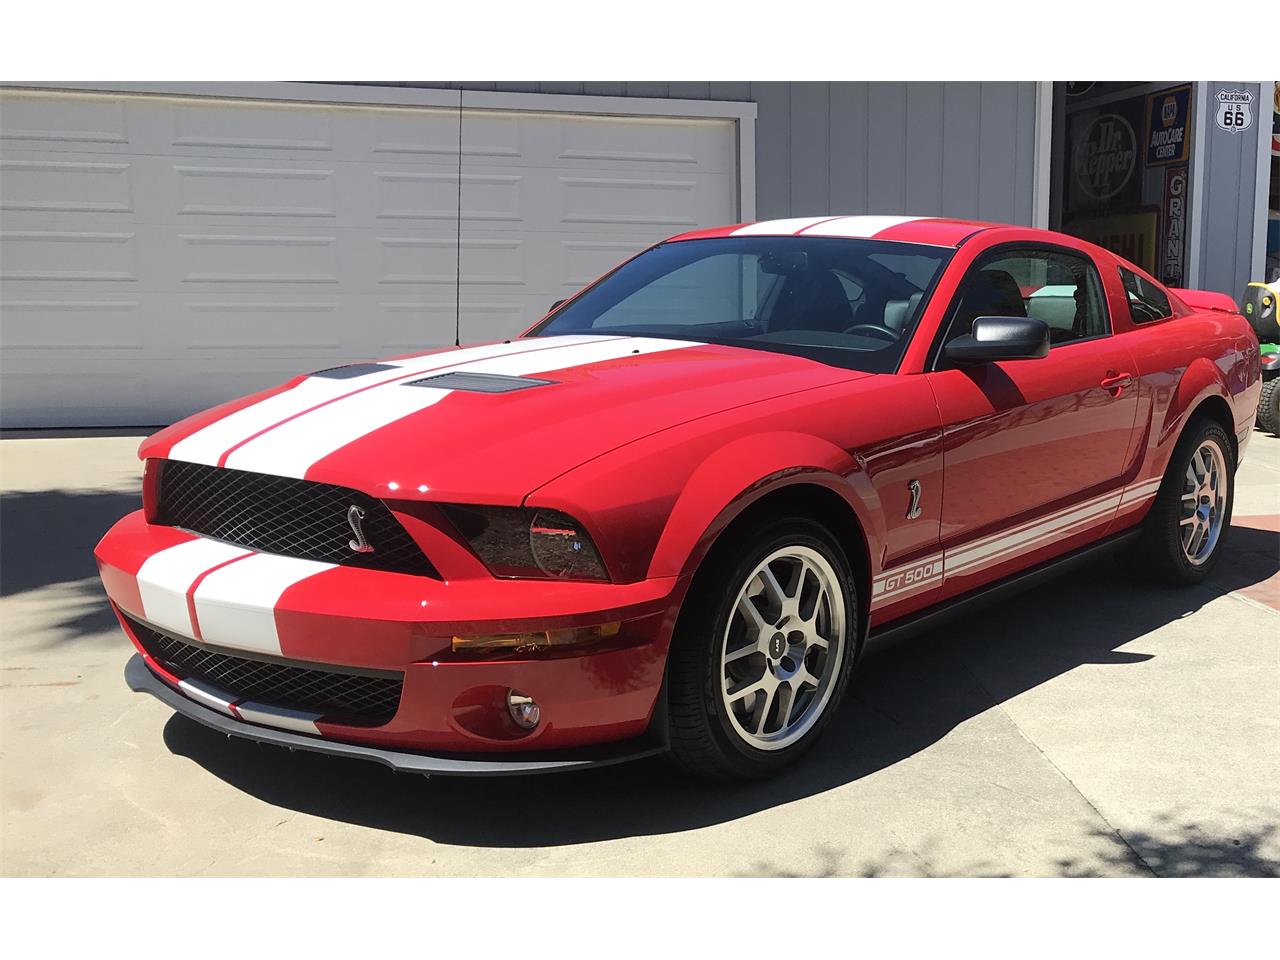 For Sale: 2007 Ford Mustang Shelby GT500 in Salinas, California for sale in Salinas, CA